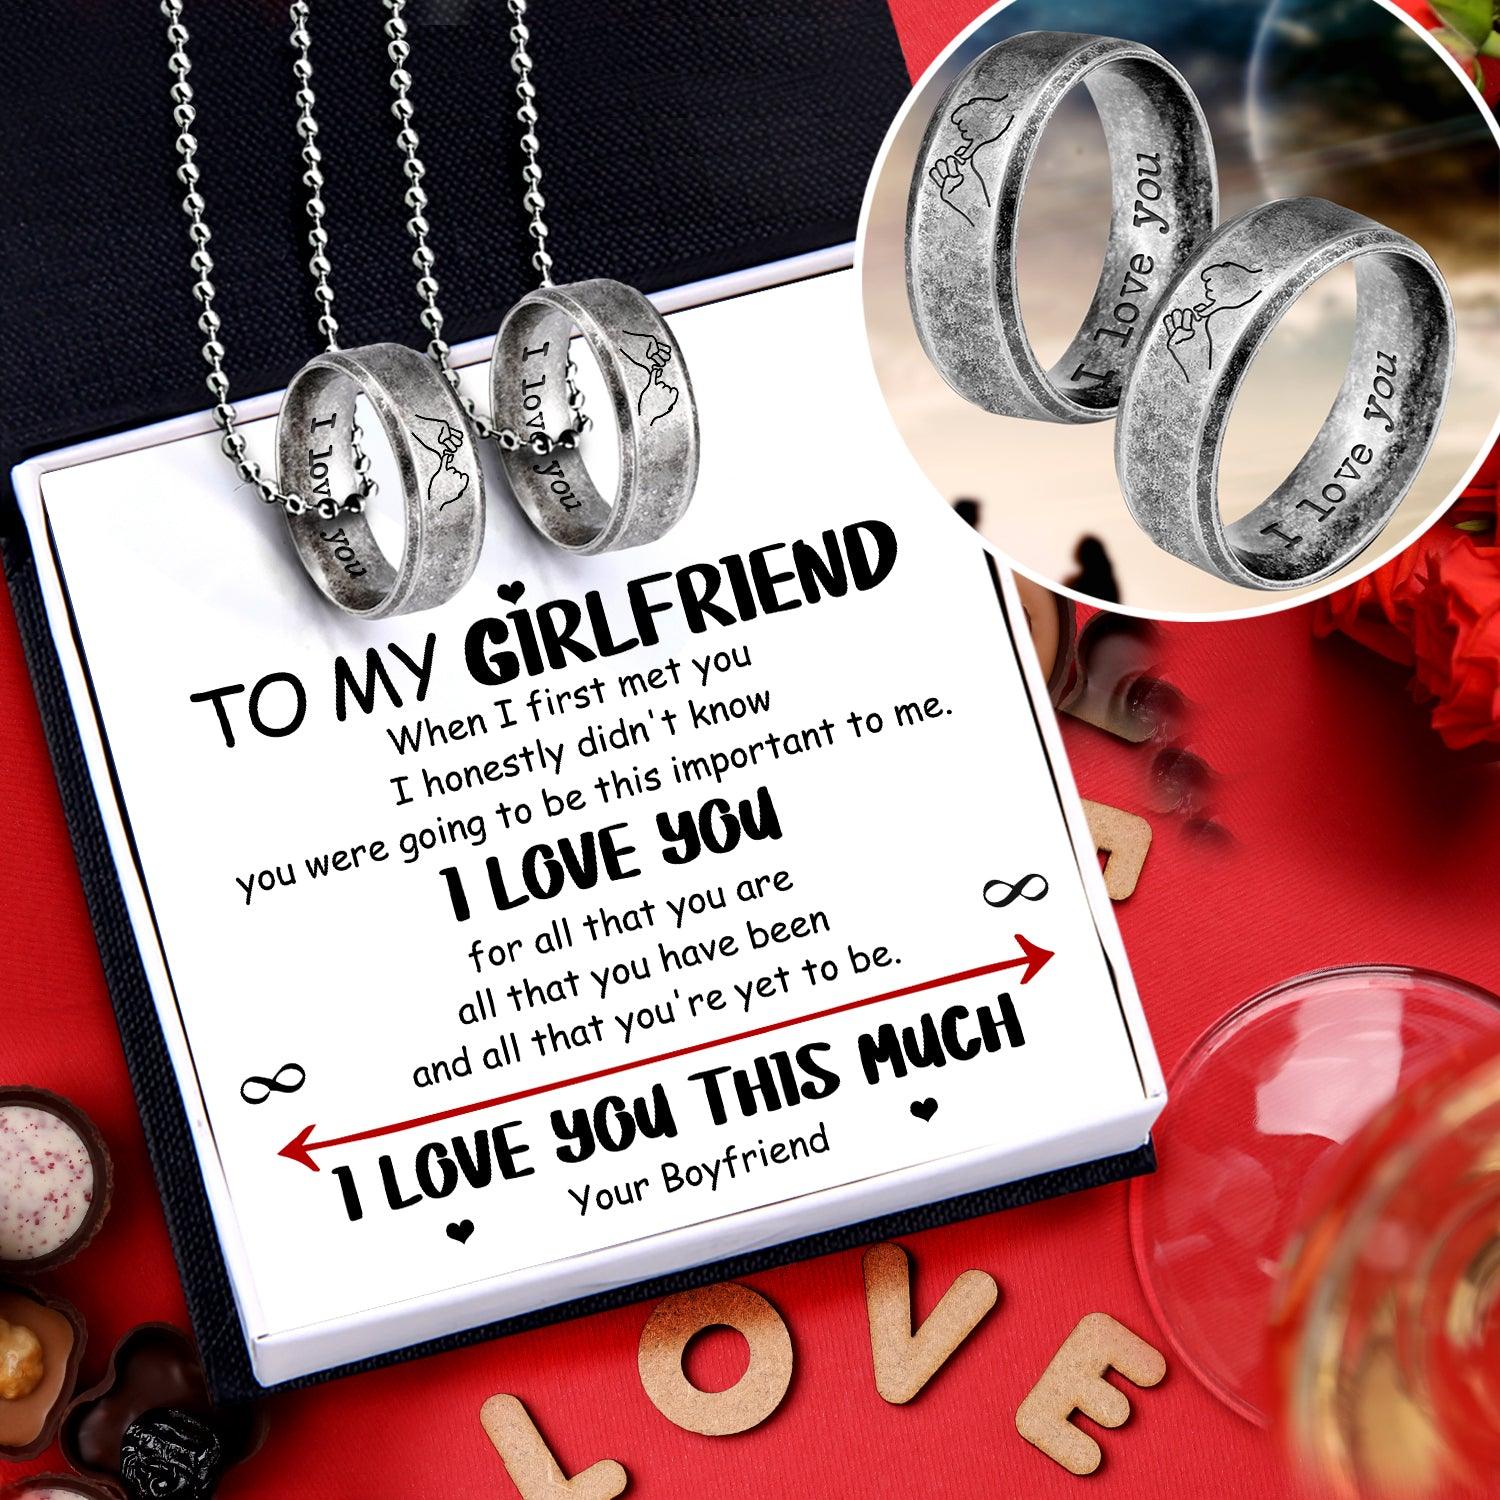 Couple Rune Ring Necklaces - Family - To My Girlfriend - I Love You - Augndx13006 - Gifts Holder